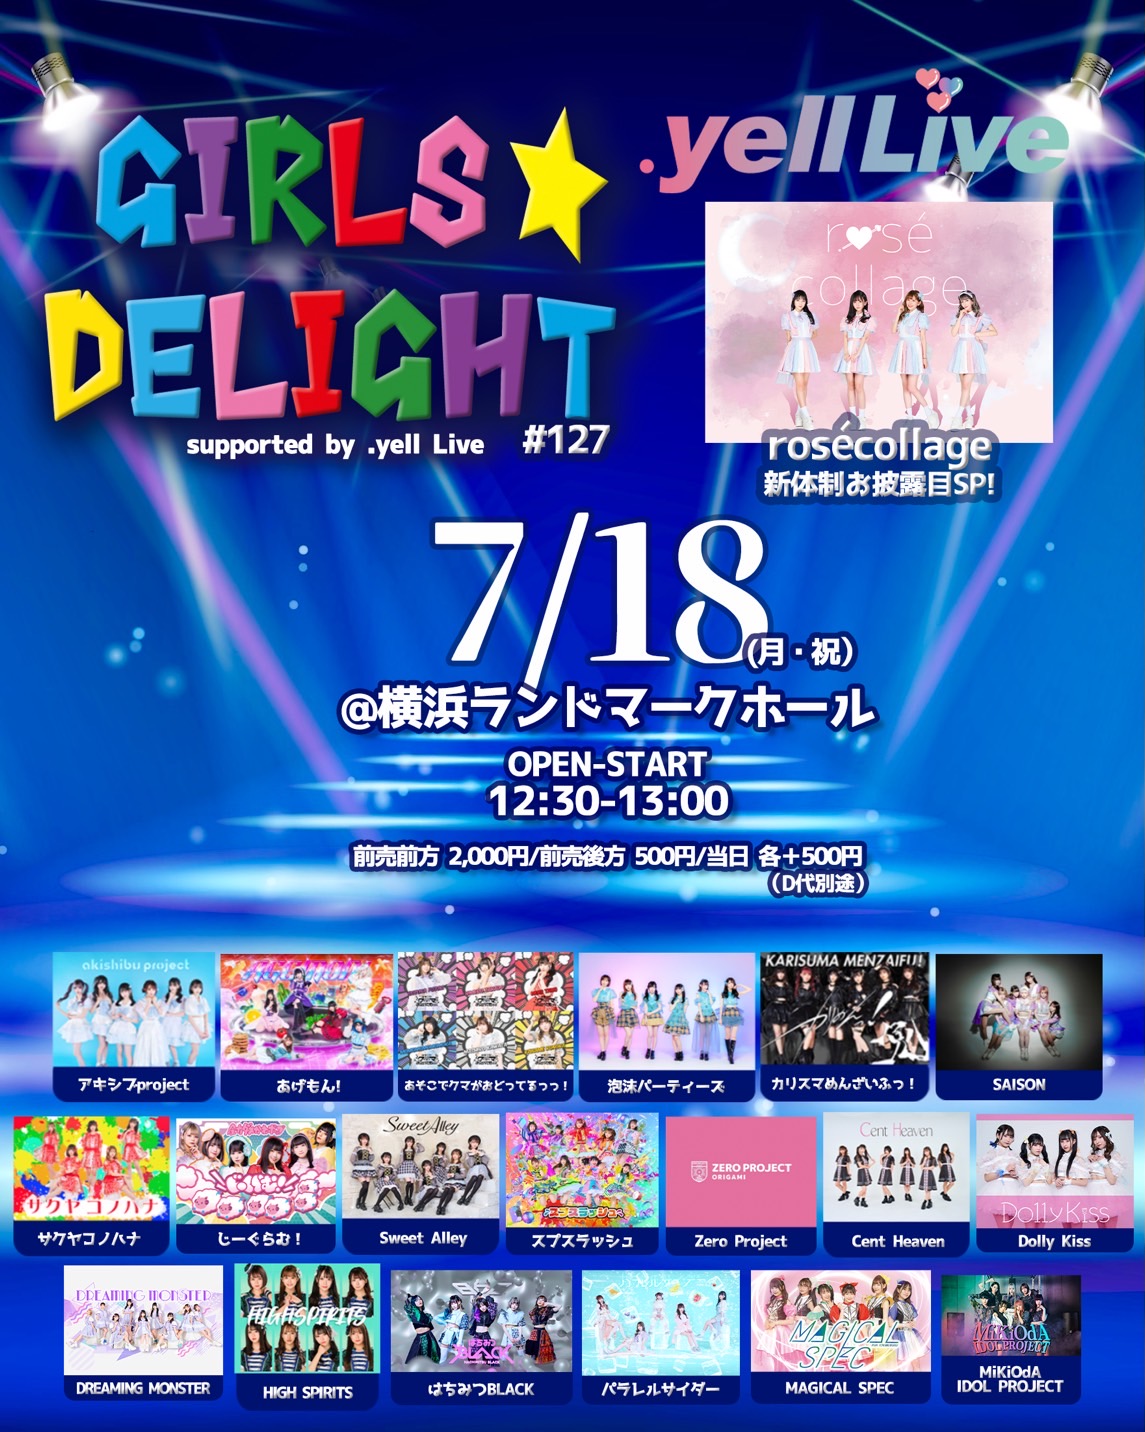 『GIRLS☆DELIGHT#127 supported by .yell Live』